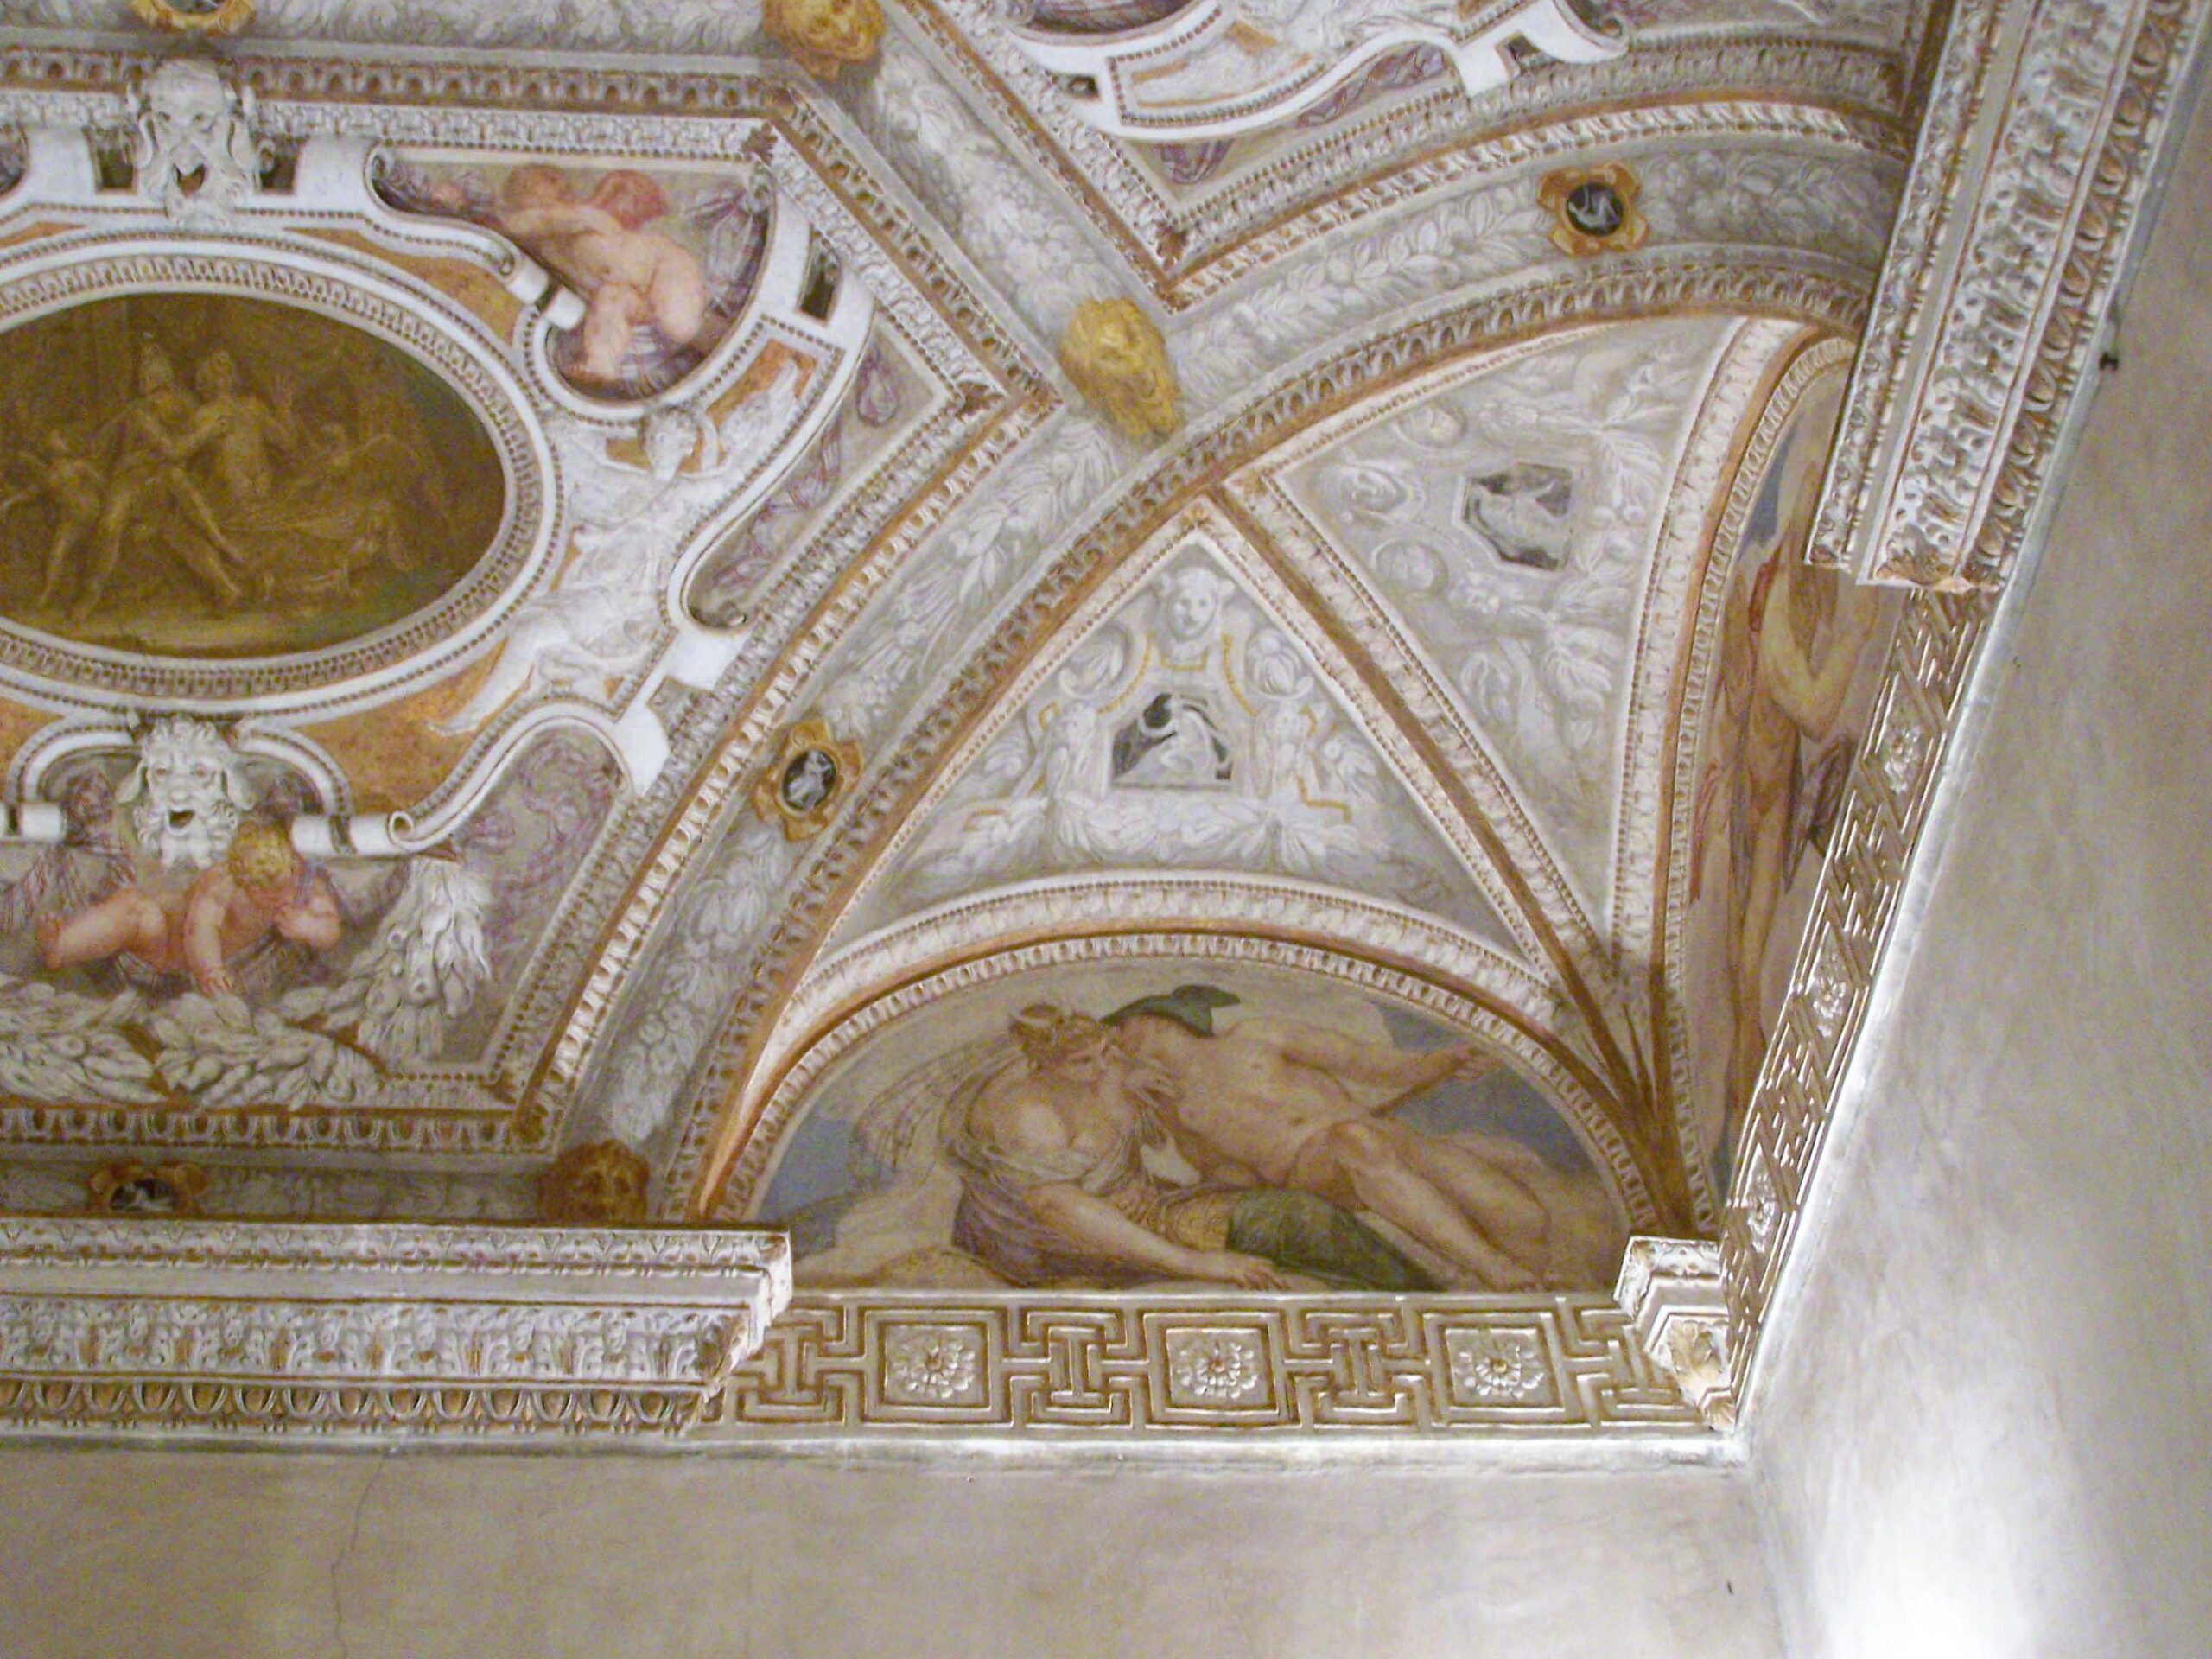 Museo Civico, Palazzo, Chiericati, Vicenza, museo, mostra, tiepolo, Musée Civique, Musée, Civic, Museum